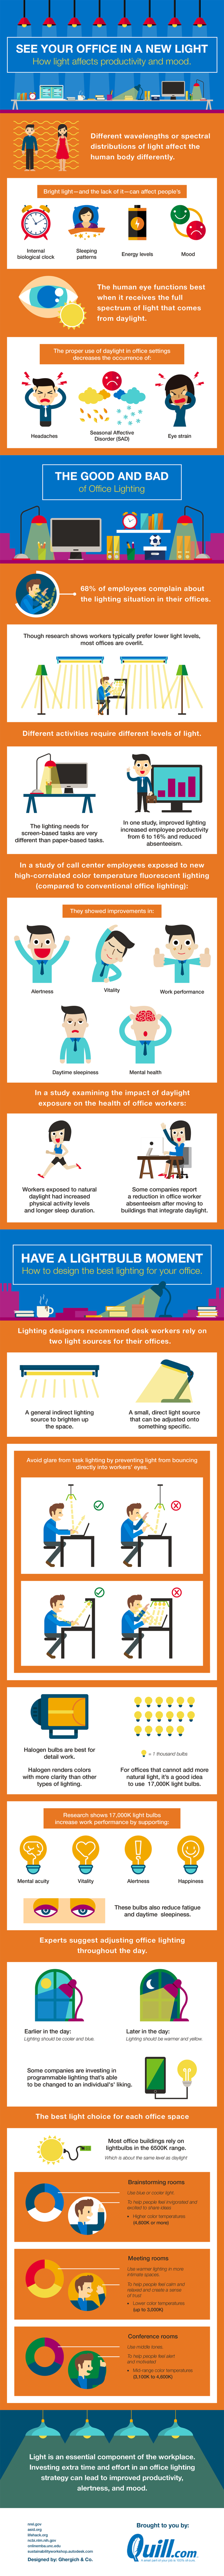 See your office in a new light: How light affects productivity and mood